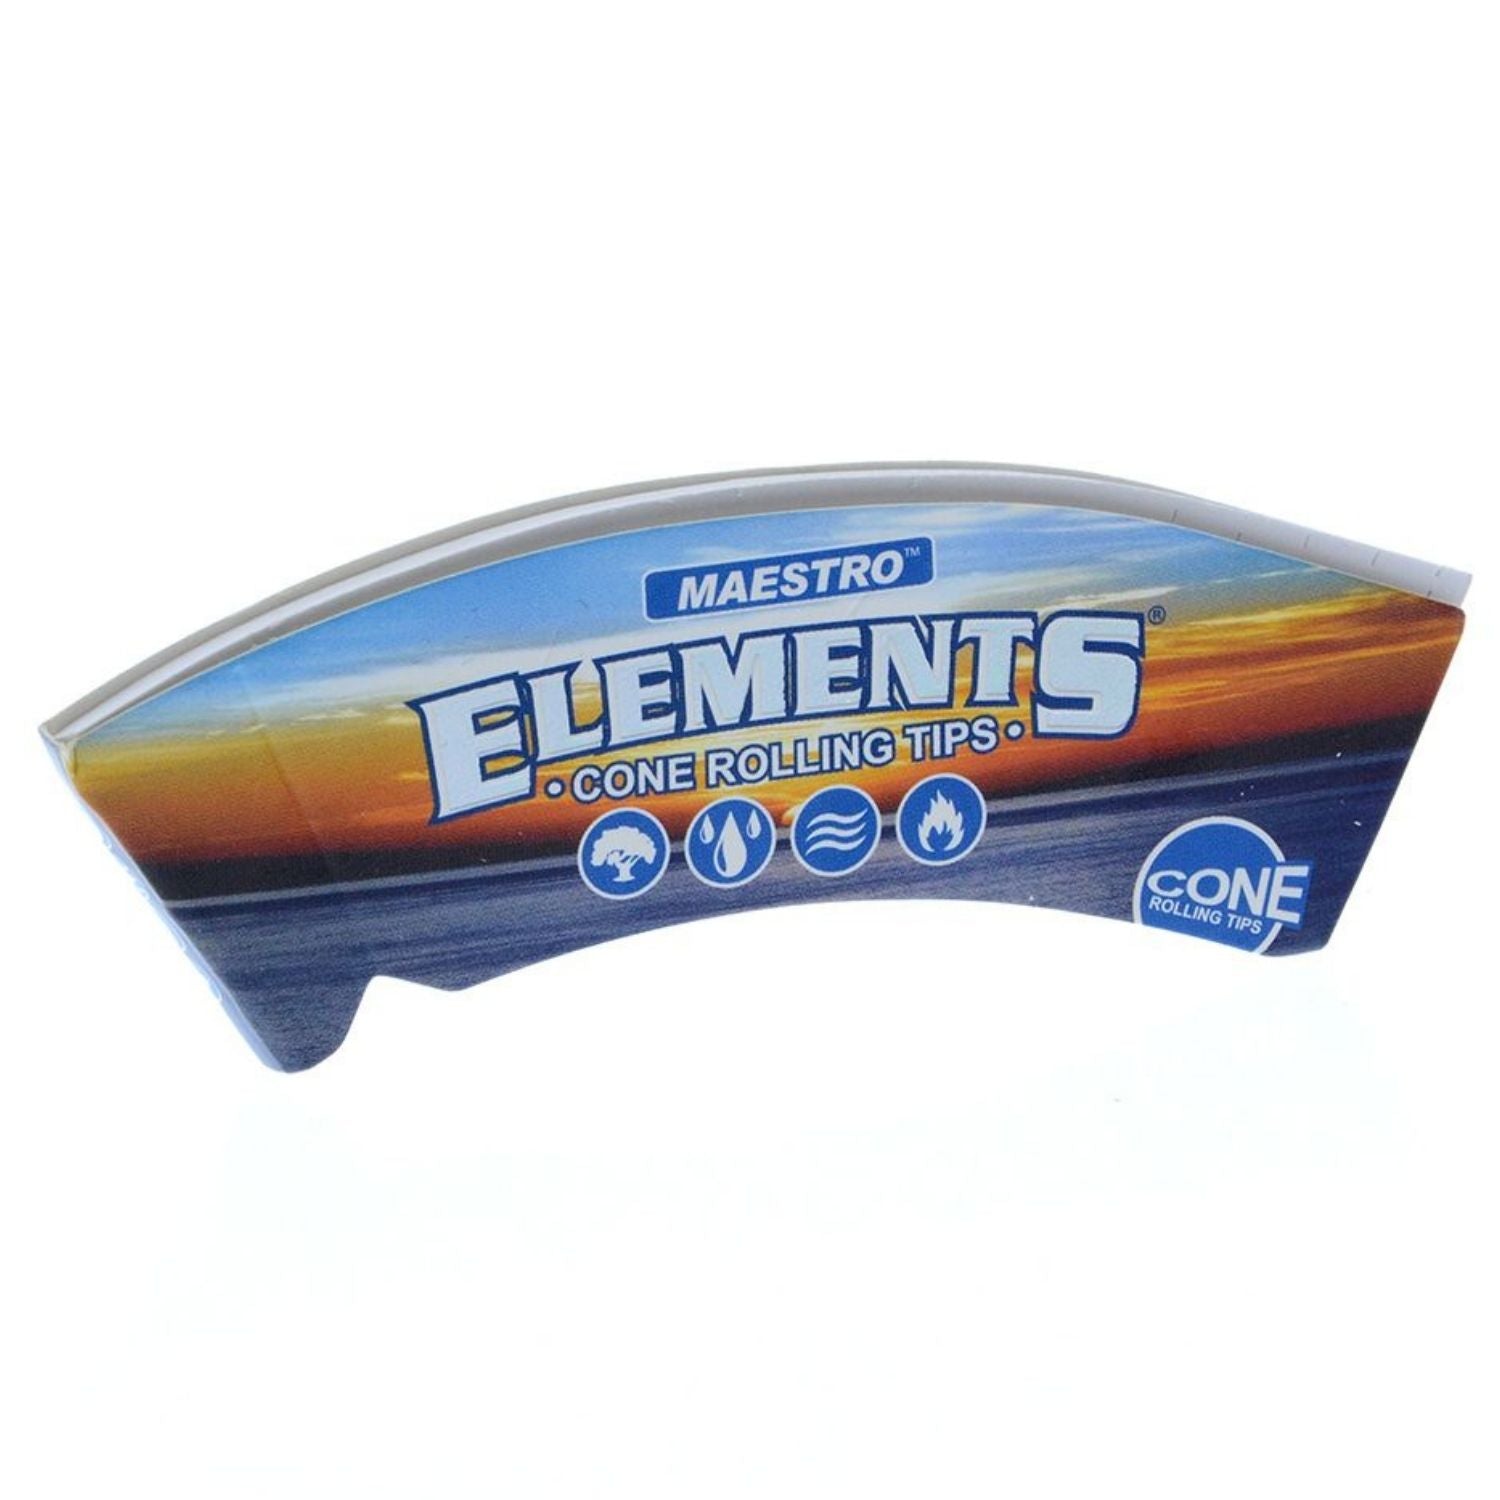 Elements Maestro Cone Filter Tips - 32 Tips